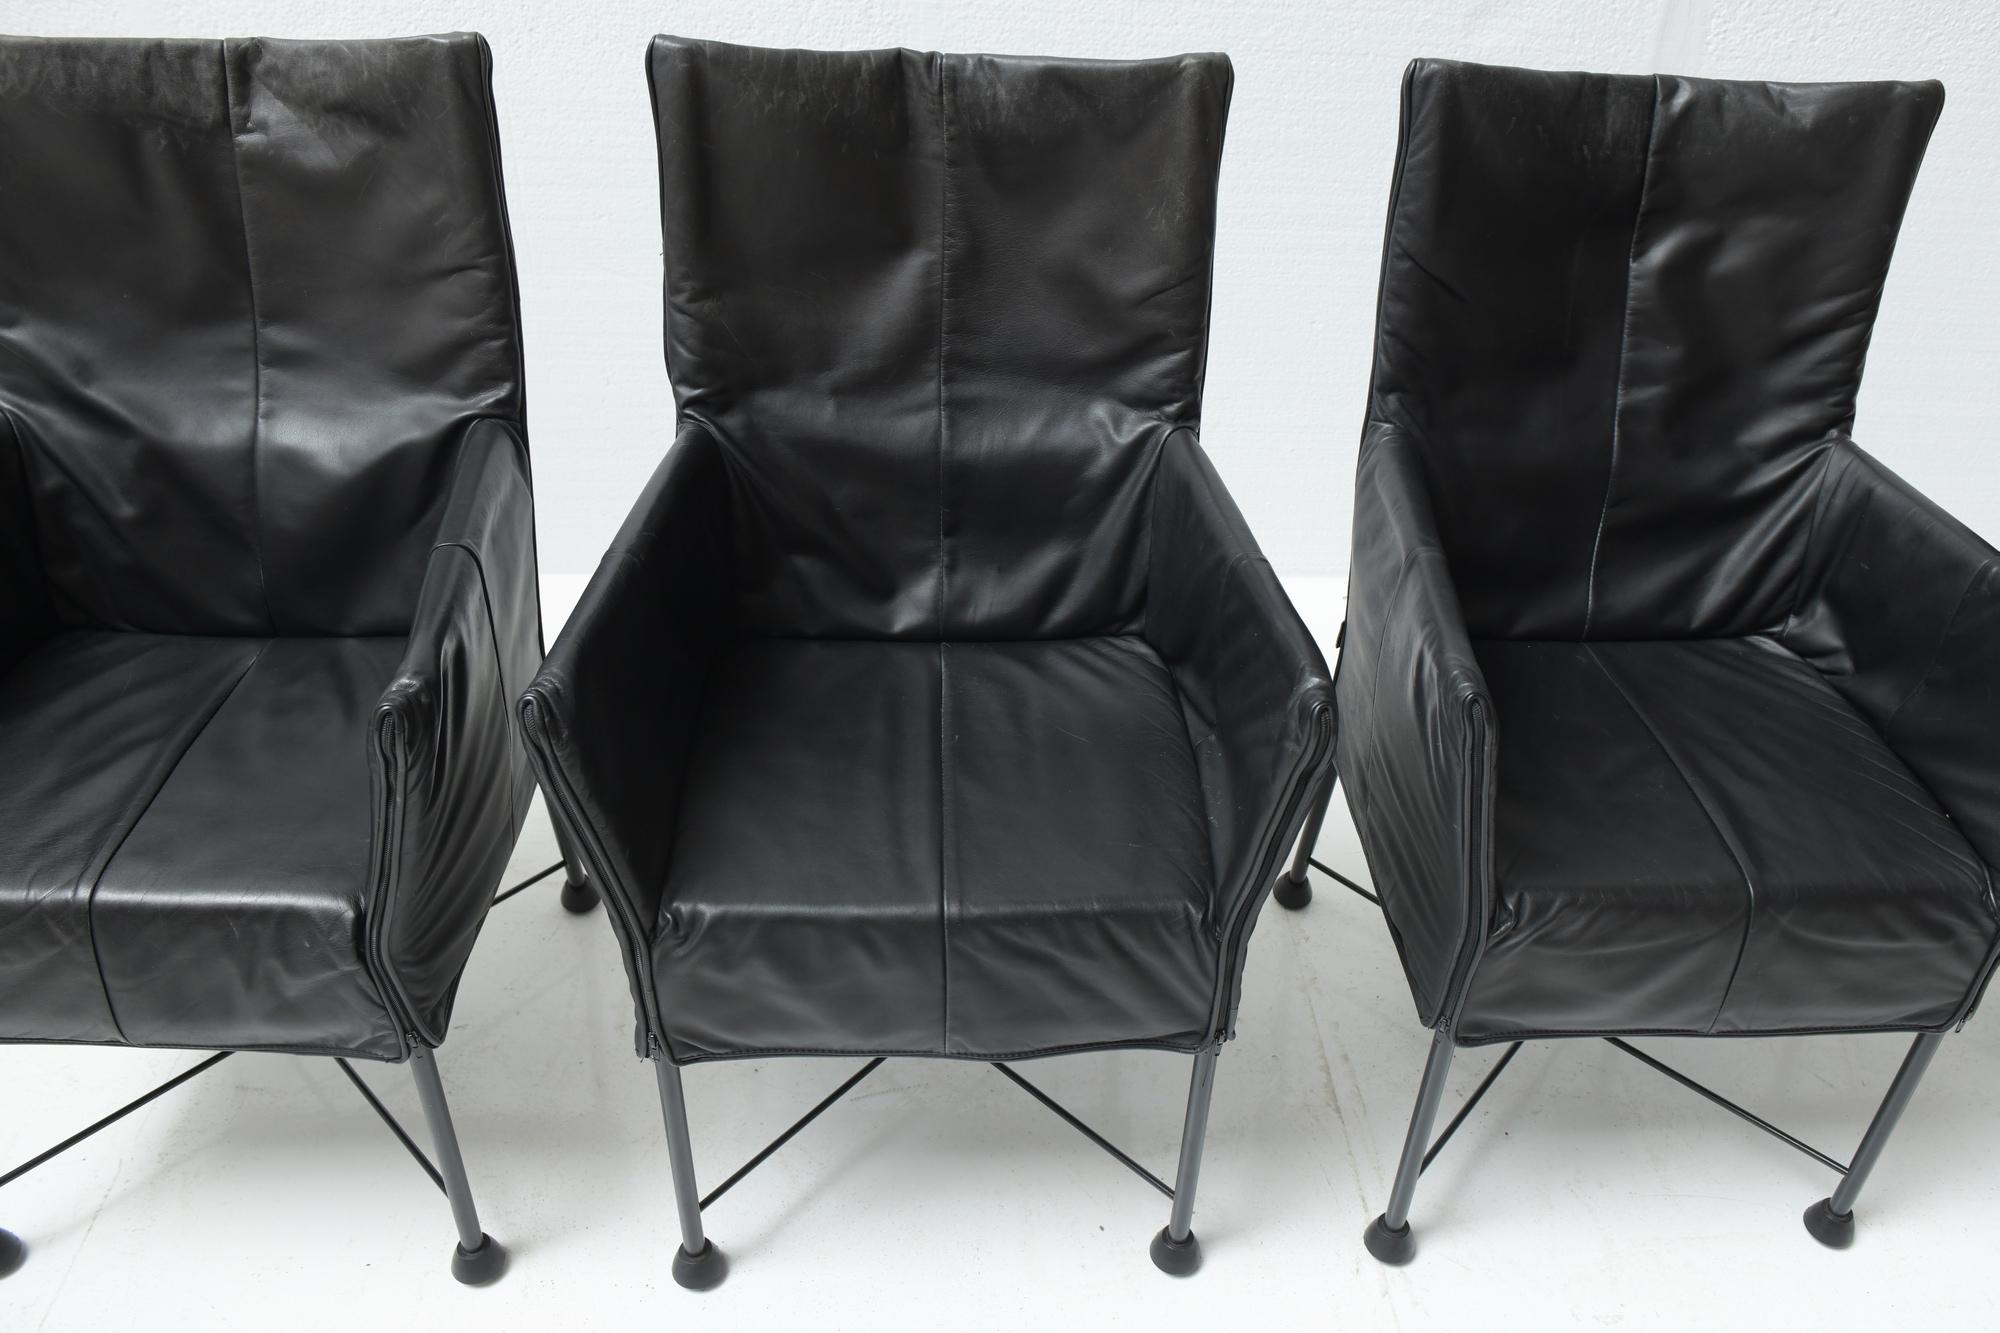 6 x Chaplin Vintage Leather Dining Chairs by Gerard van den Berg for Montis For Sale 5